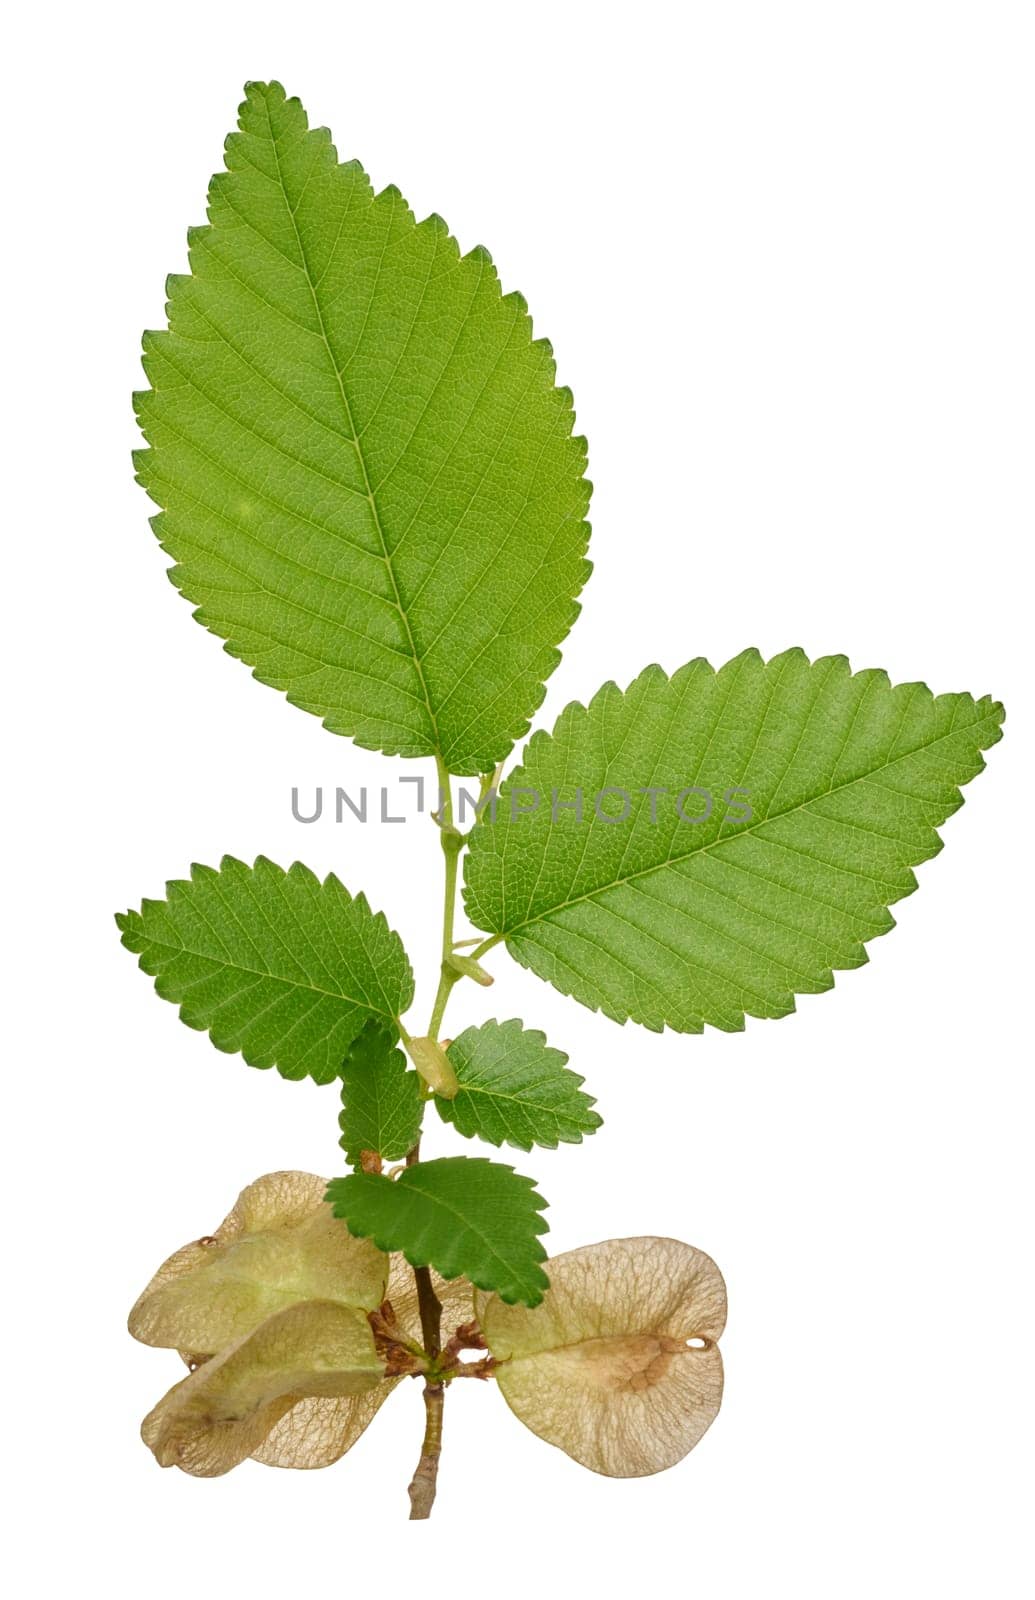 Branch with green leaves of Elm, or Ulmus, on isolated background, close up